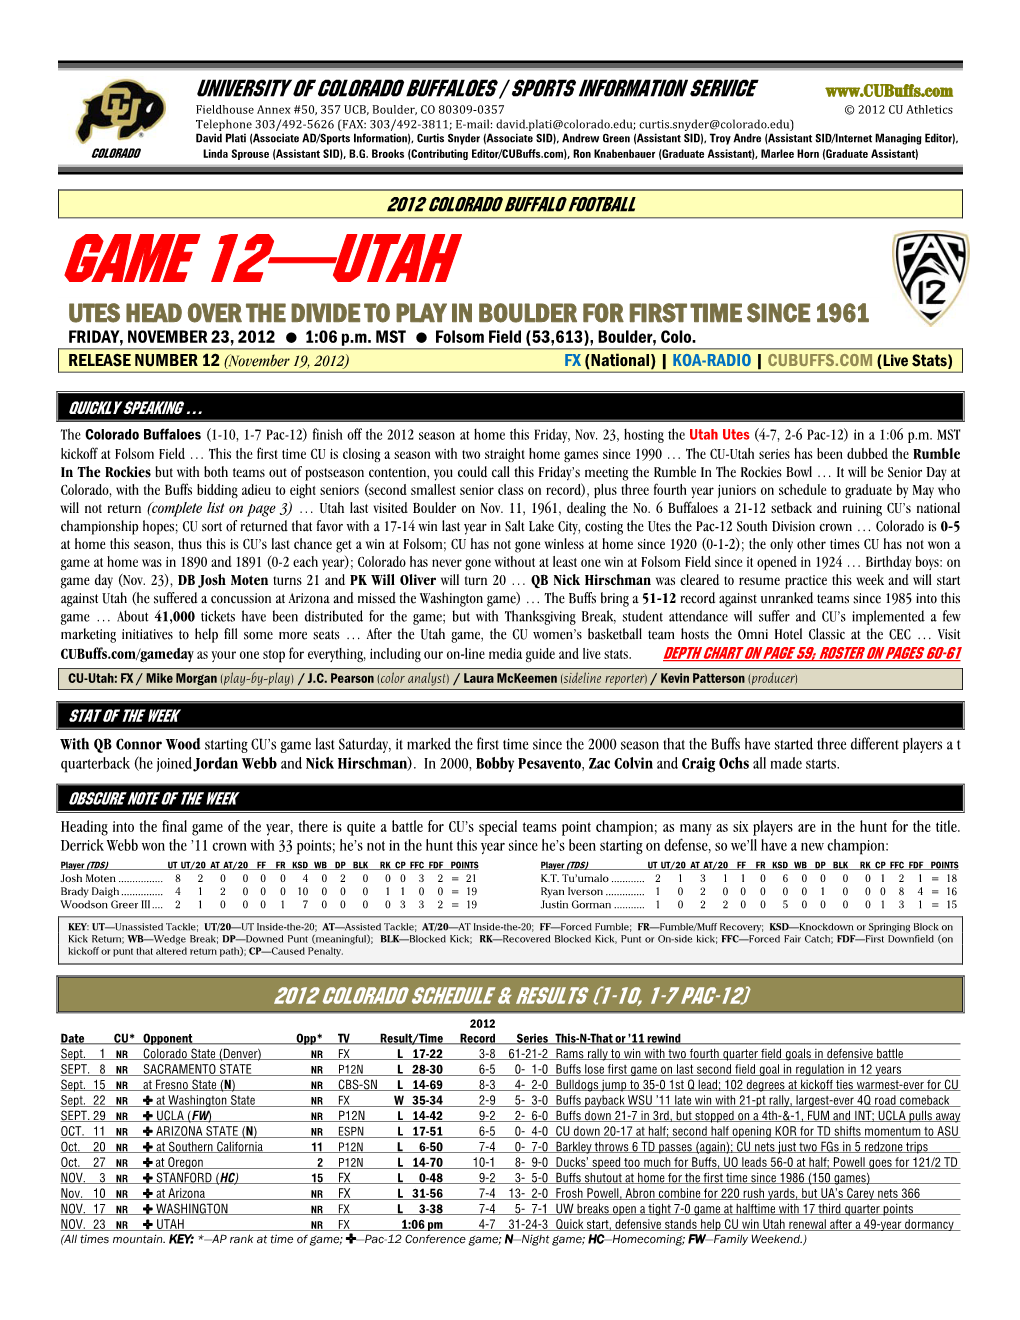 GAME 12—UTAH UTES HEAD OVER the DIVIDE to PLAY in BOULDER for FIRST TIME SINCE 1961 FRIDAY, NOVEMBER 23, 2012 1:06 P.M